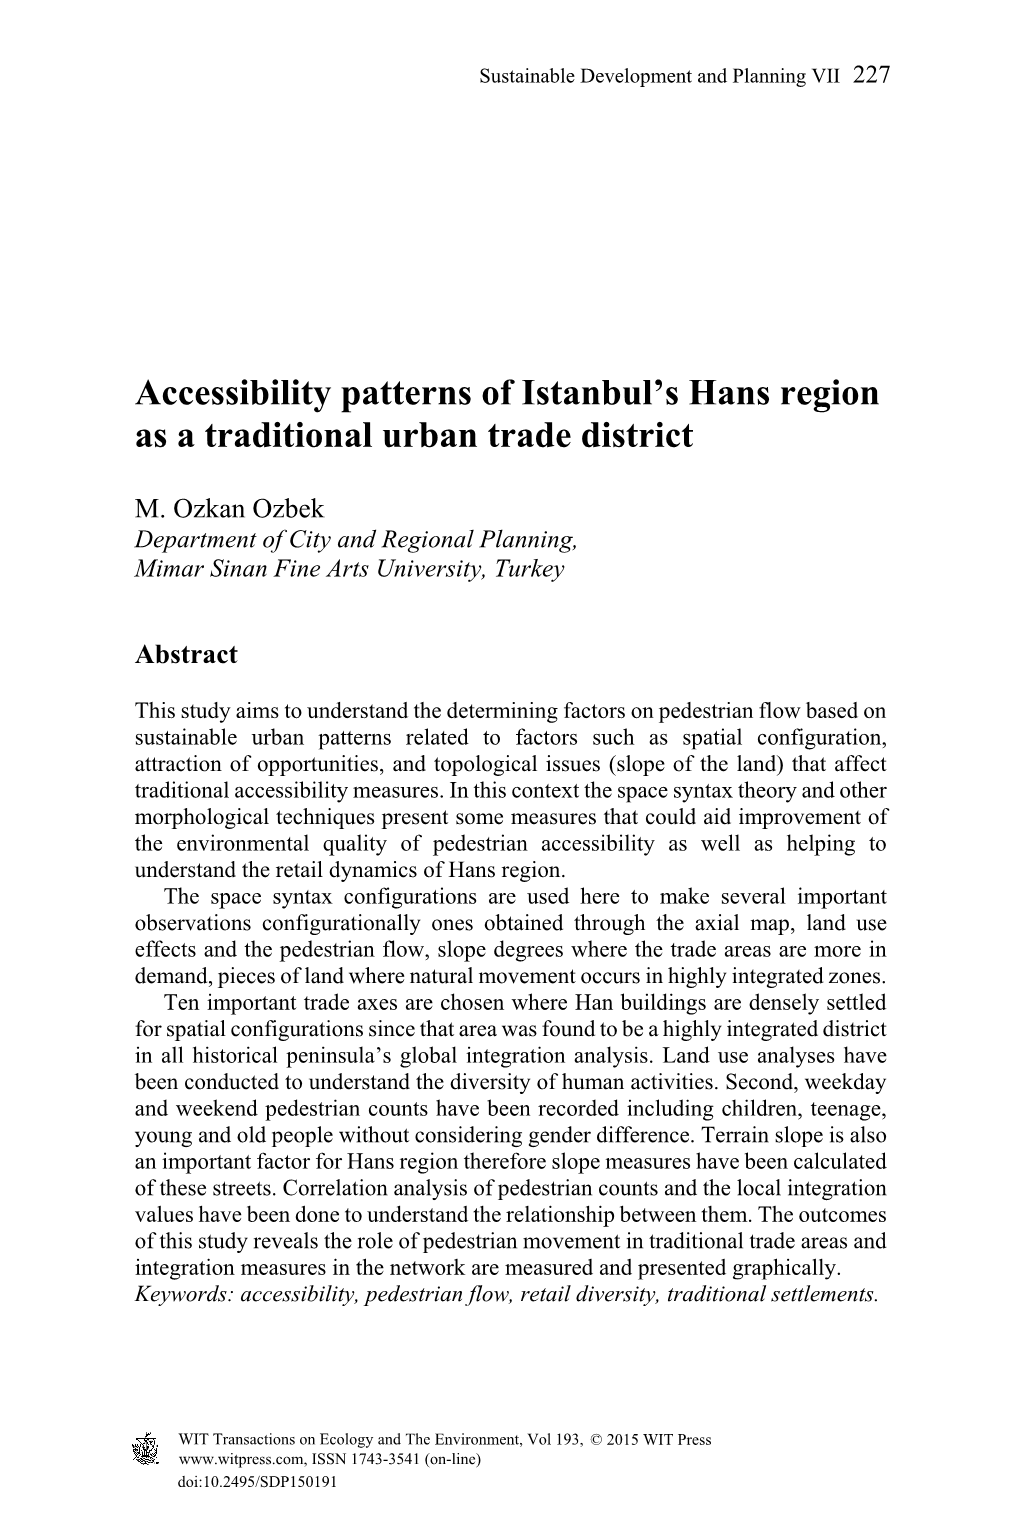 Accessibility Patterns of Istanbul's Hans Region As a Traditional Urban